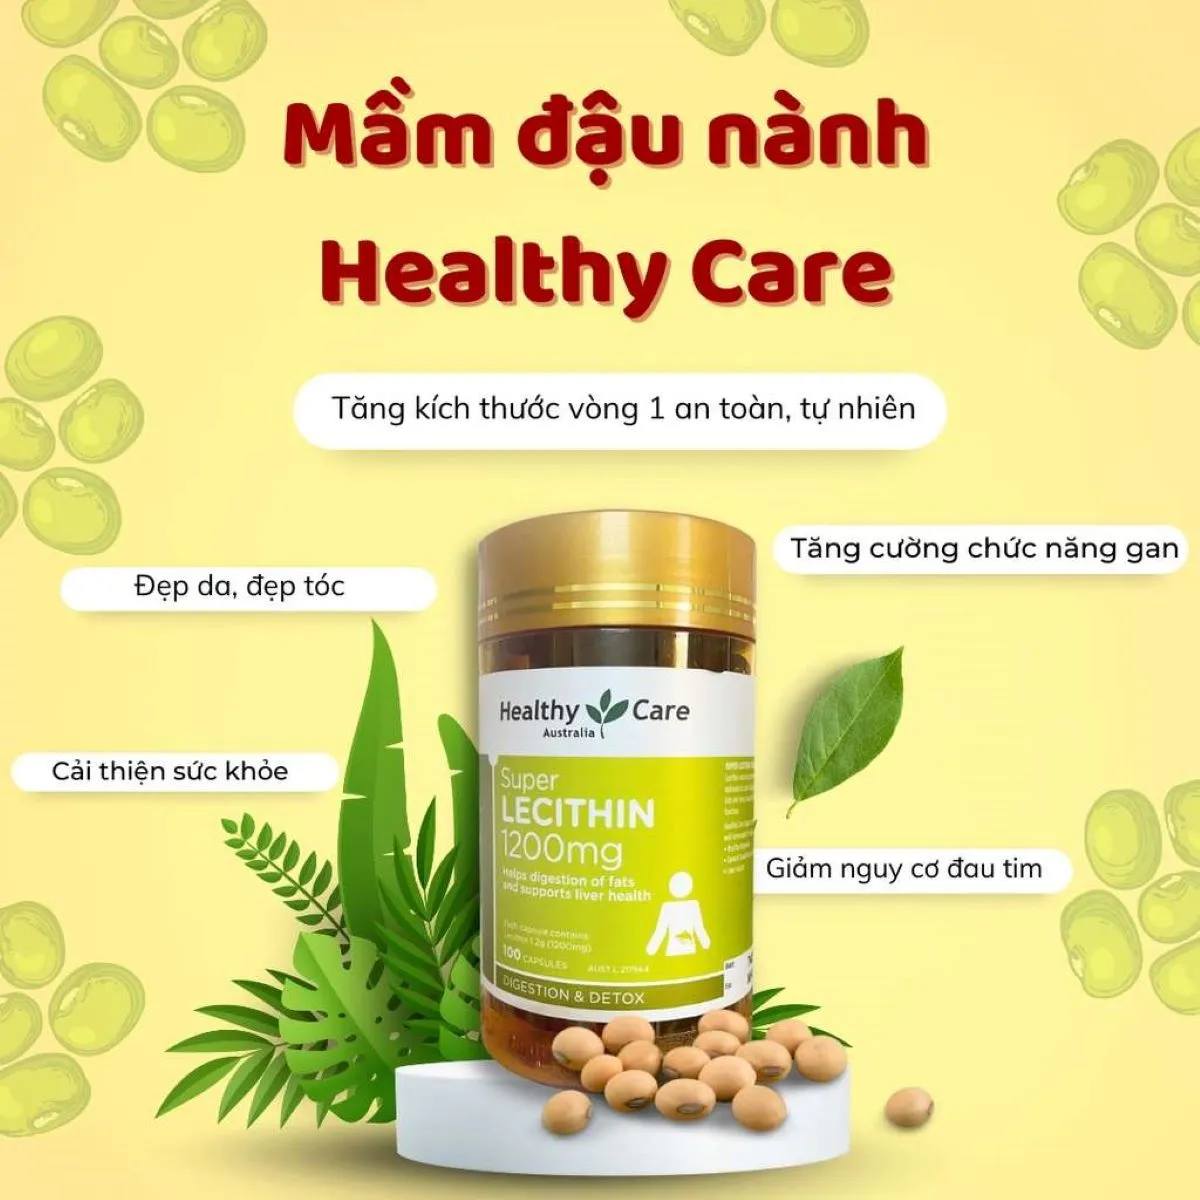 Công dụng của Healthy Care Super Lecithin 1200mg